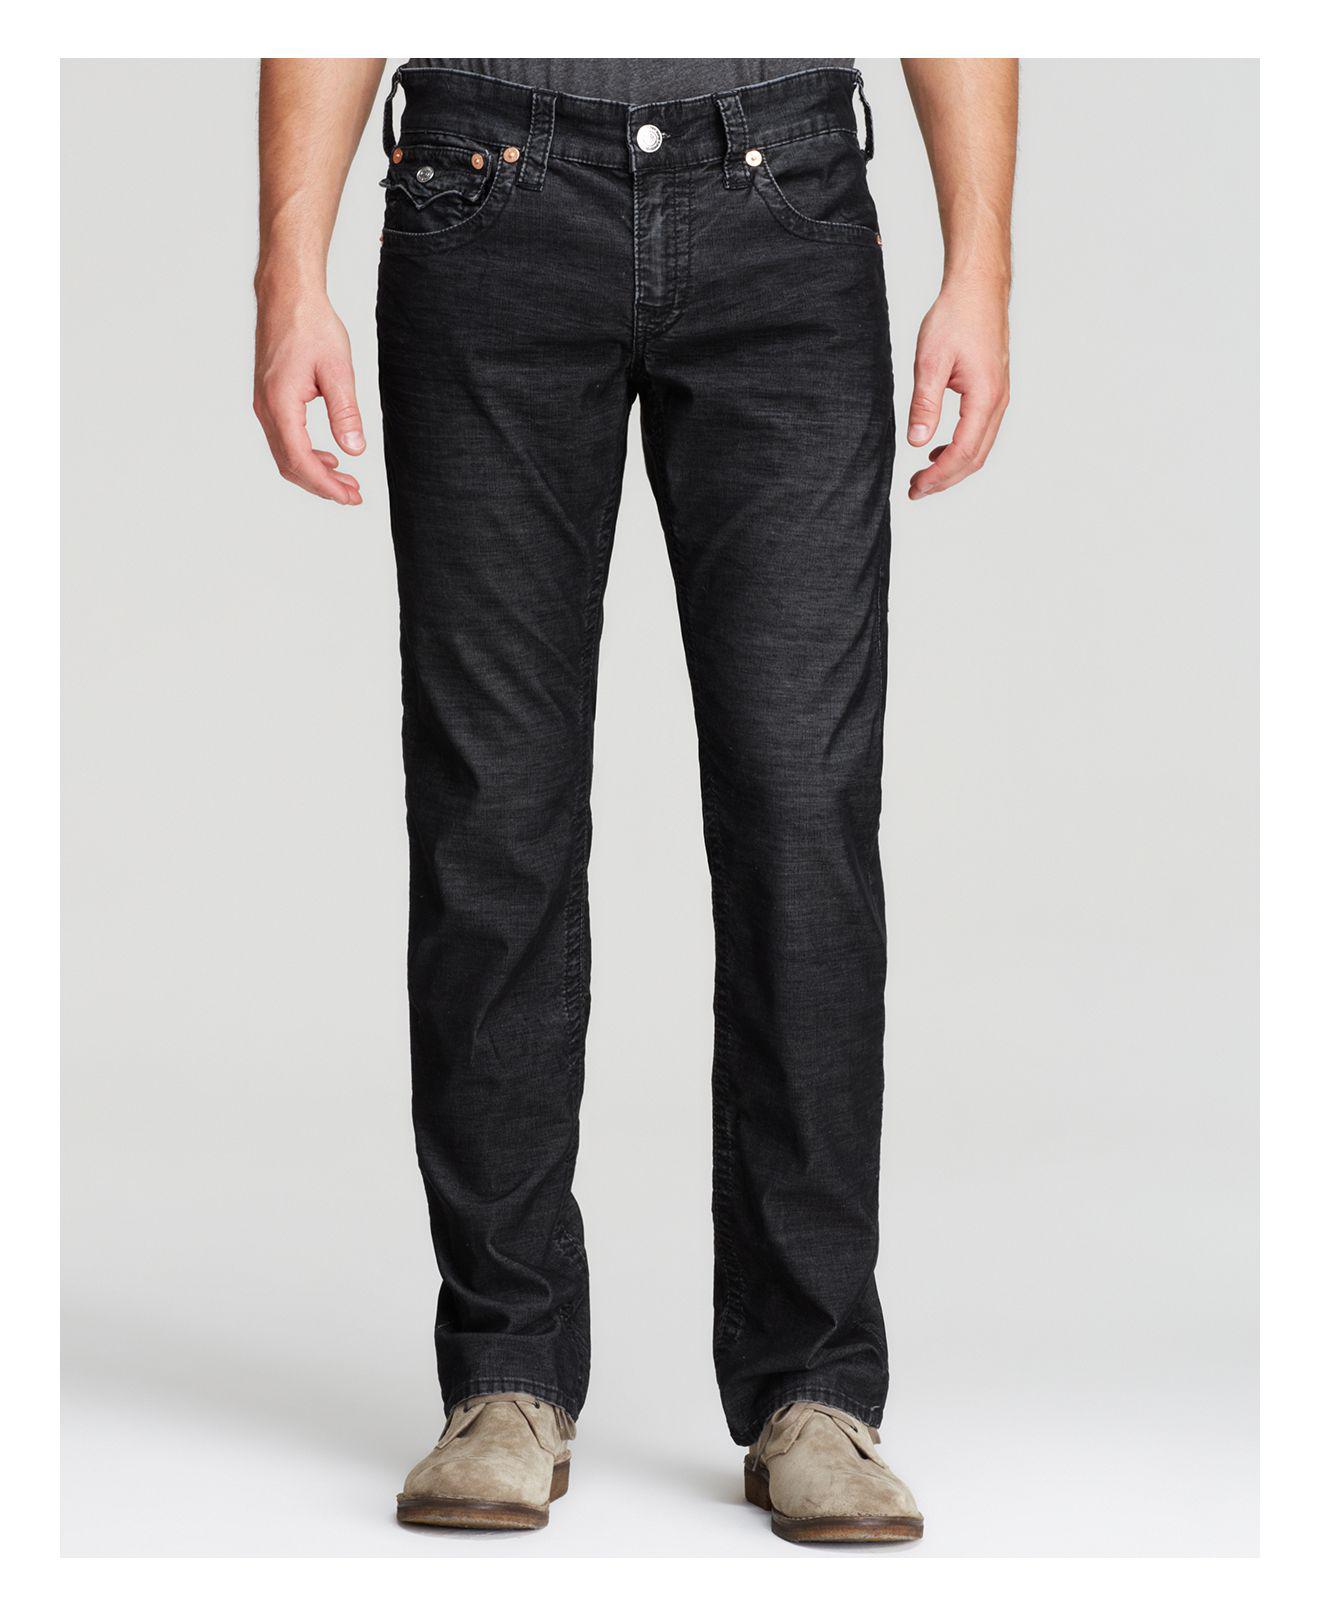 Lyst - True Religion Jeans - Ricky Relaxed Fit Cords in Black for Men